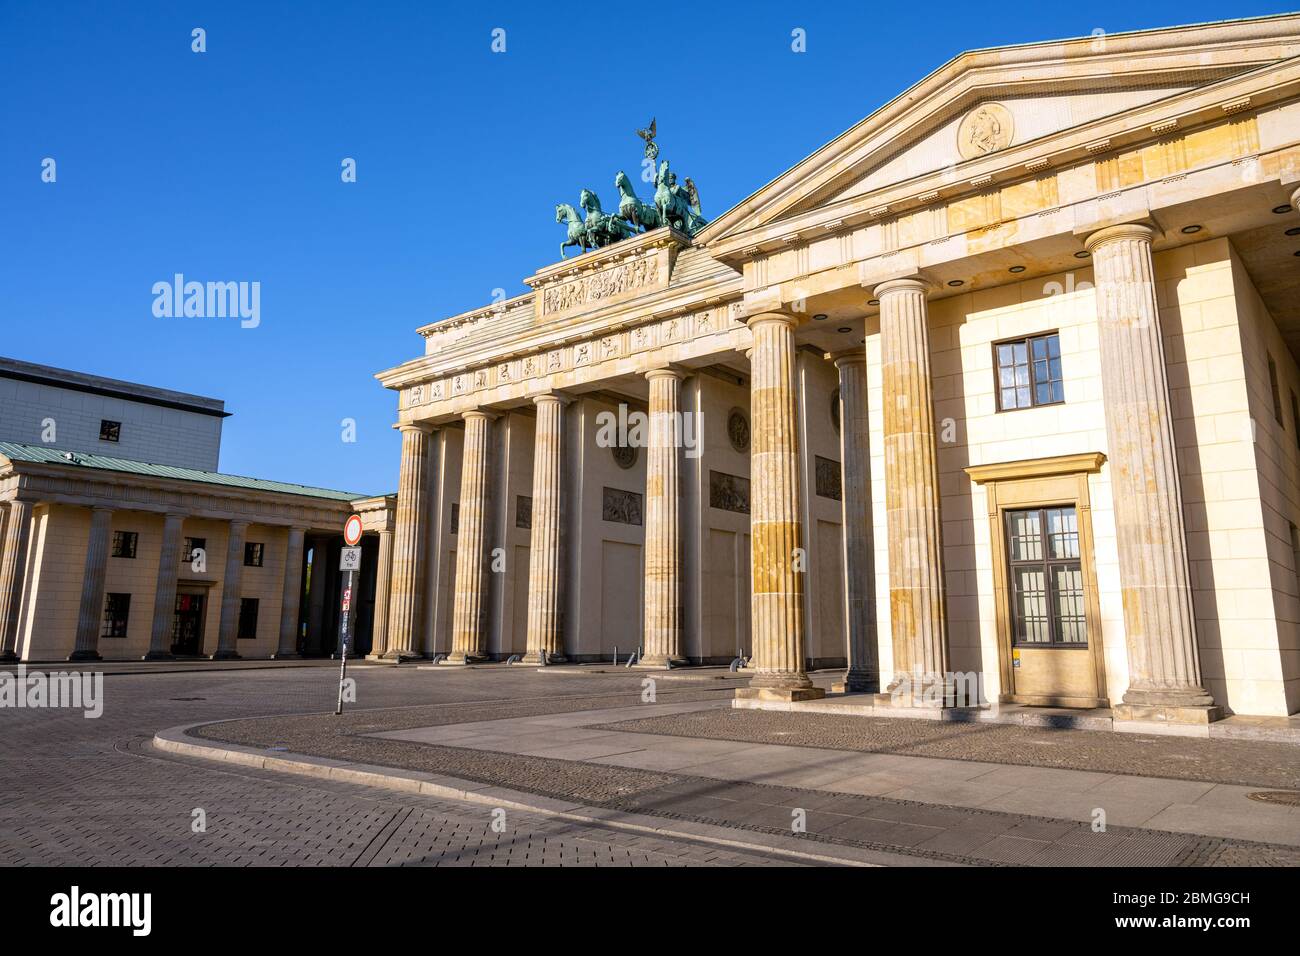 The Brandenburger Tor in Berlin early in the morning with no people Stock Photo